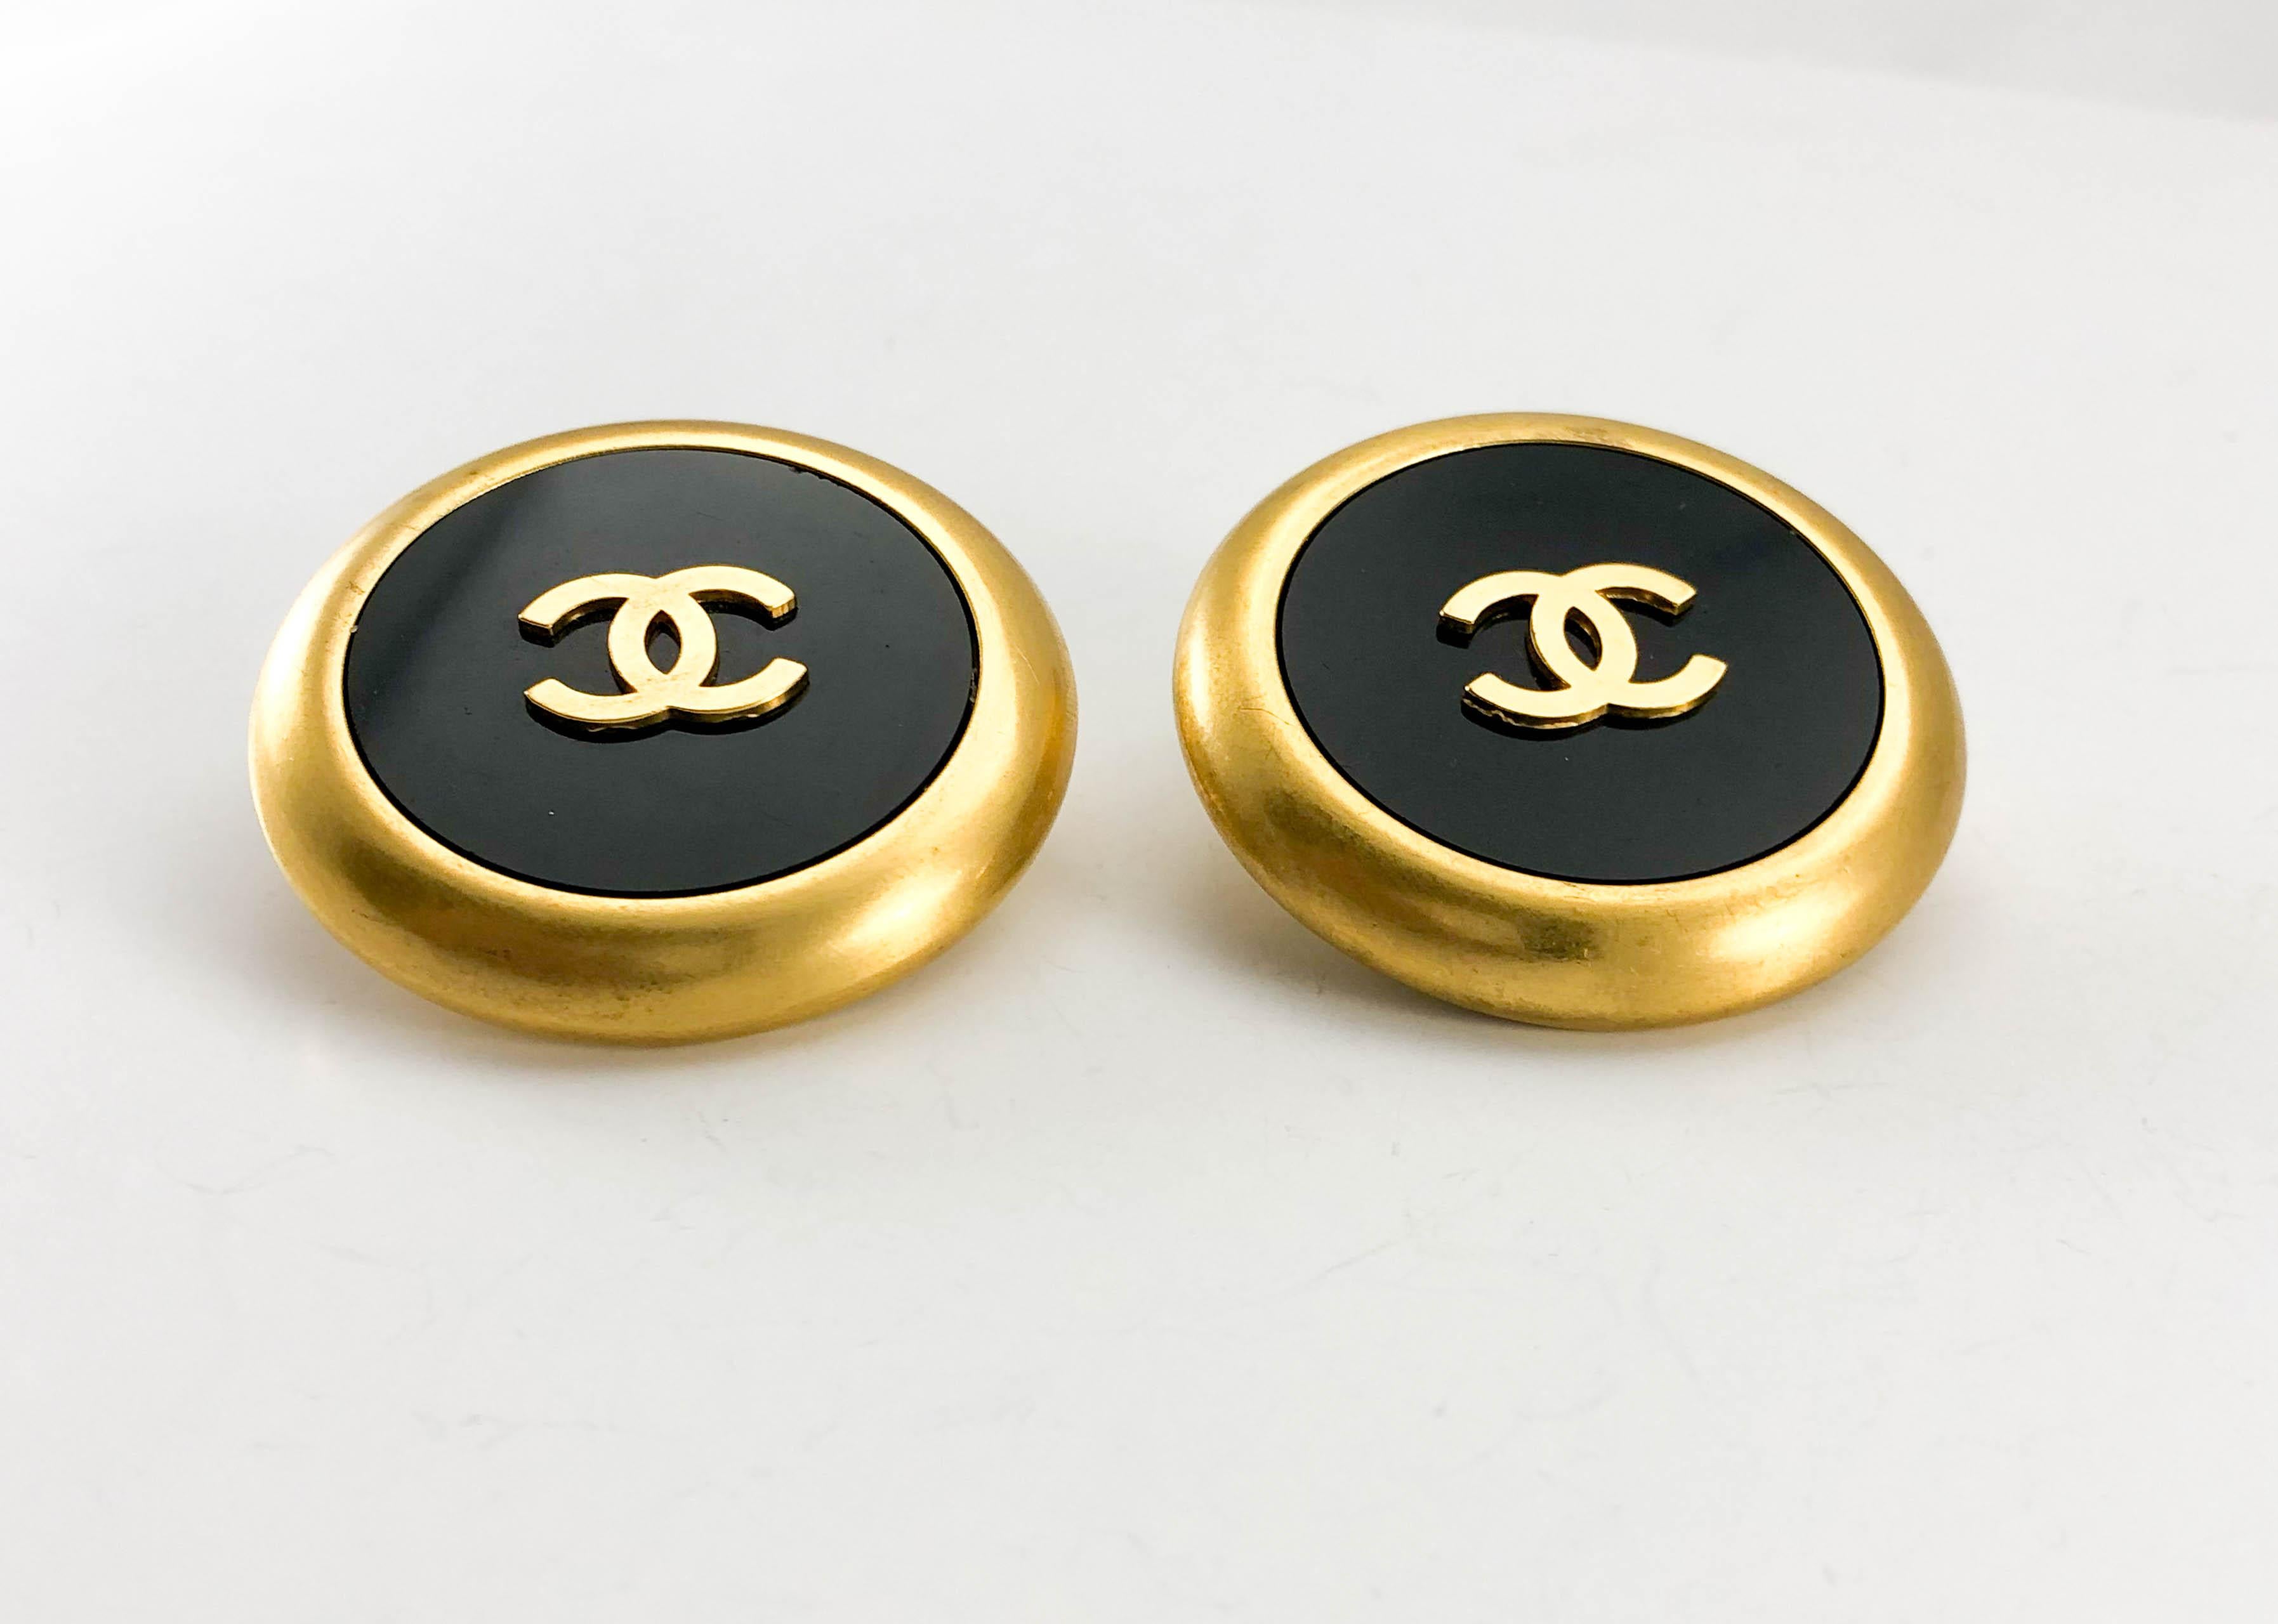 1992 Chanel Large Black And Golden Round Logo Earrings For Sale 1